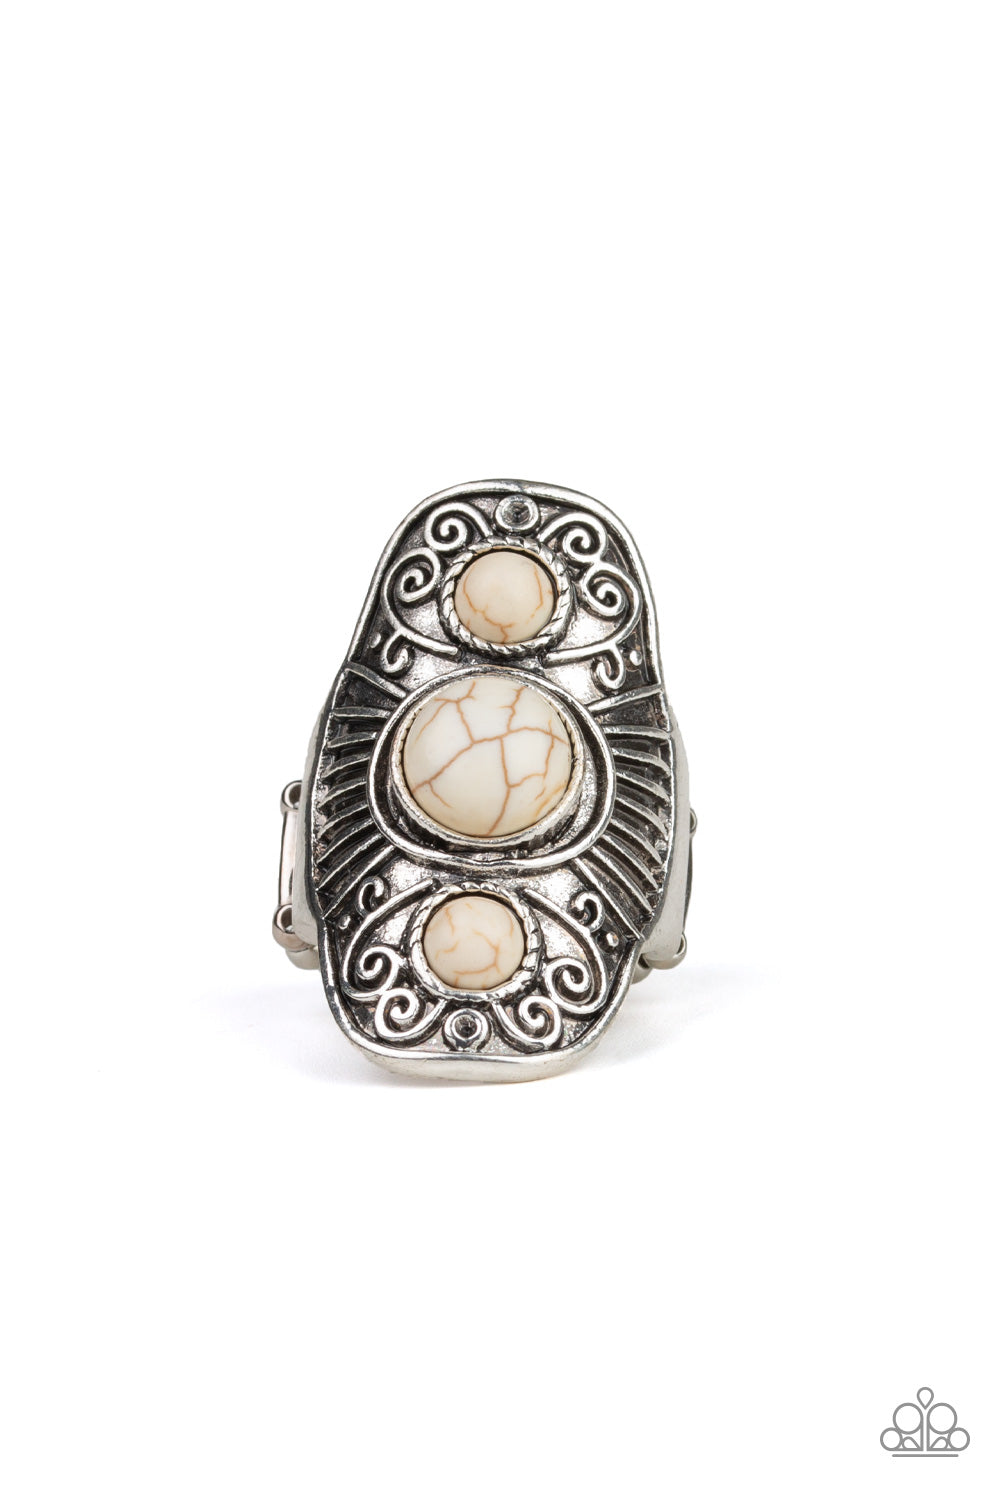 Paparazzi Accessories - Stone Oracle - White Ring - Alies Bling Bar